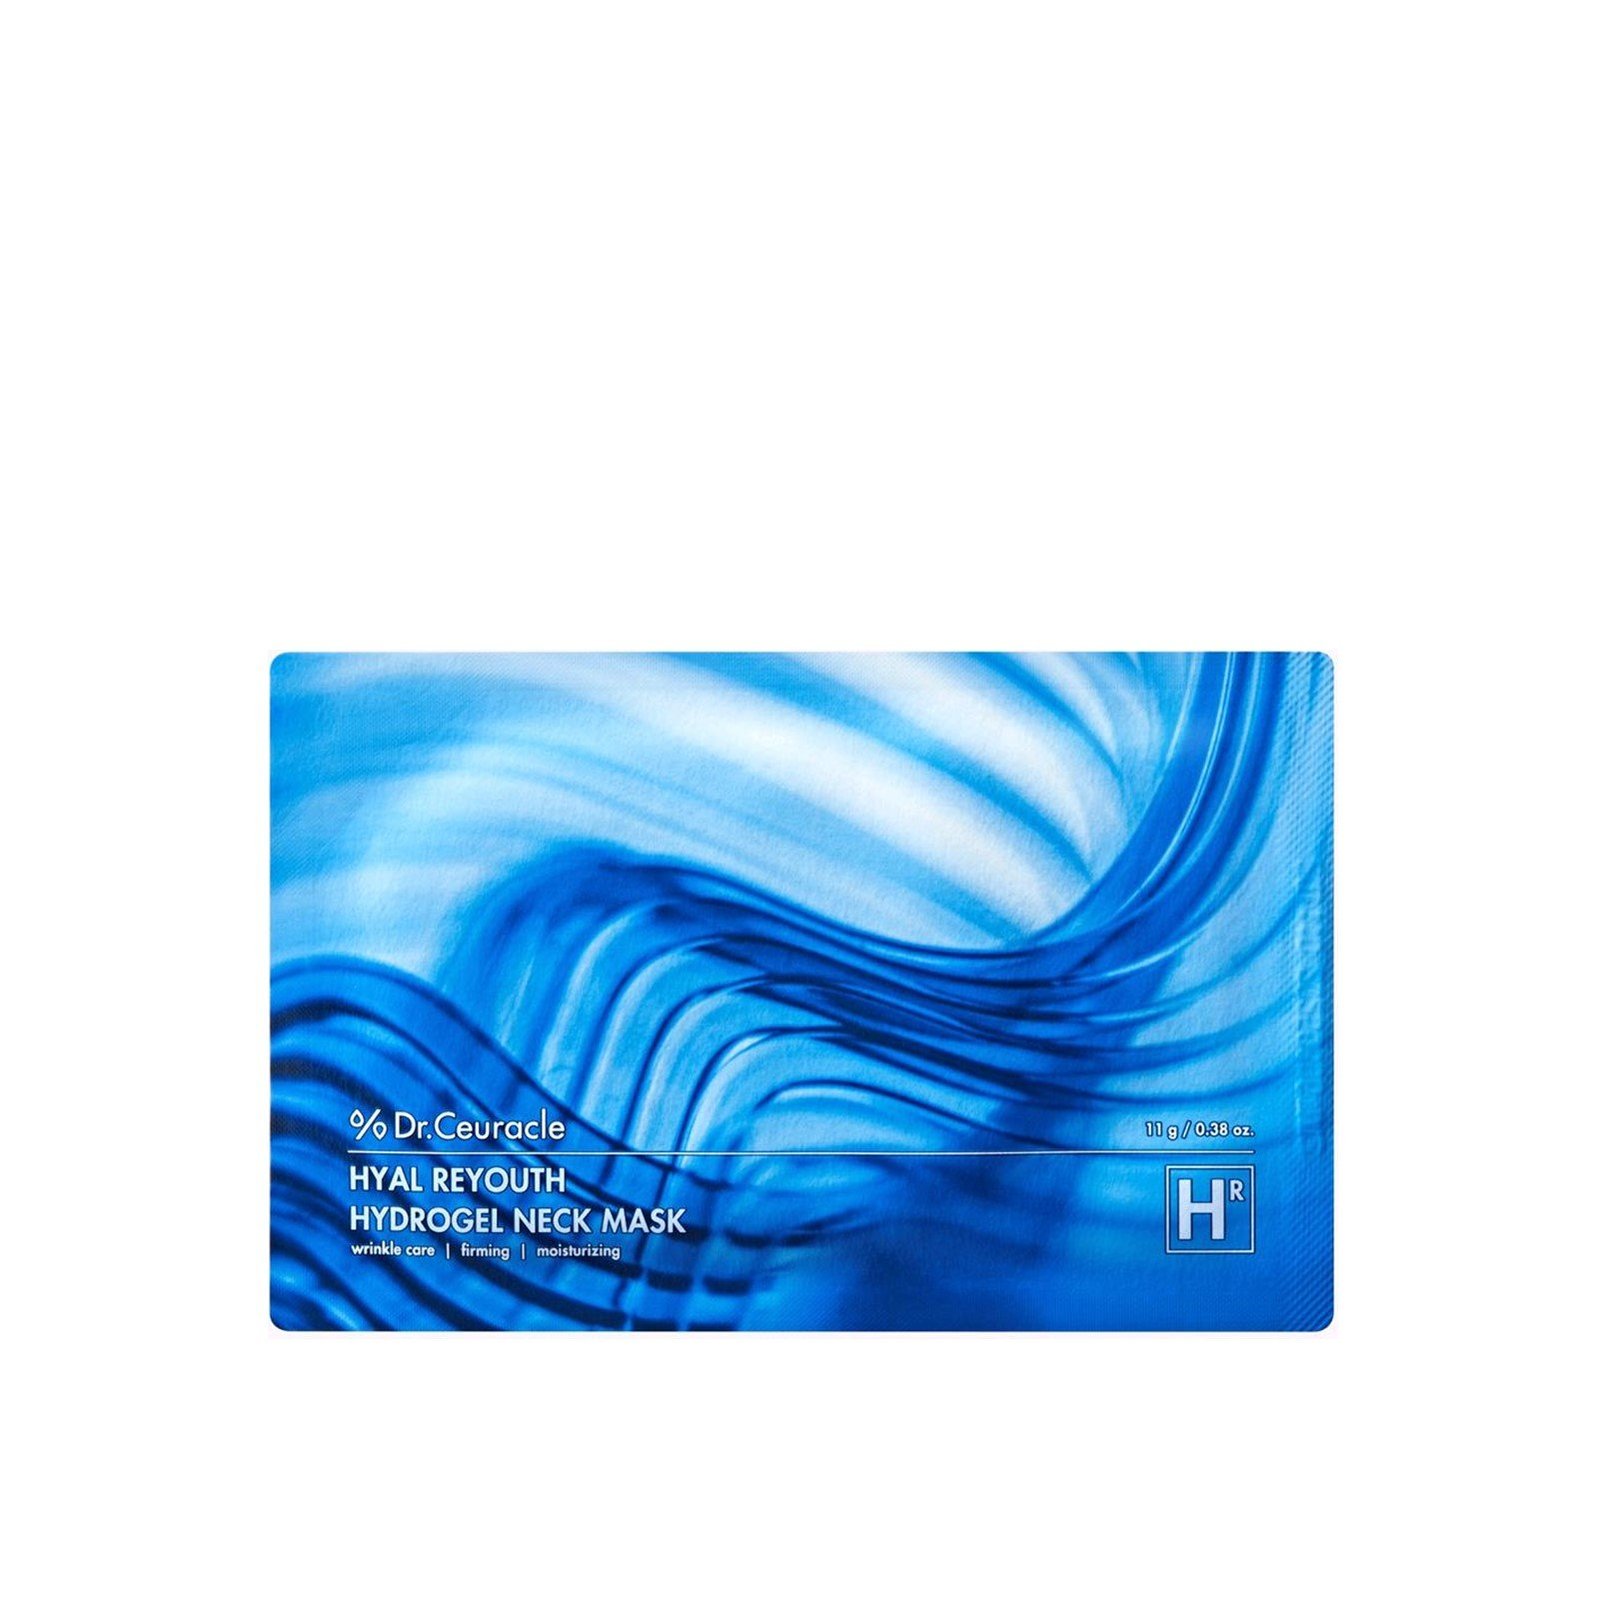 Dr. Ceuracle Hyal Reyouth Hydrogel Neck Mask 11g (0.38 oz)